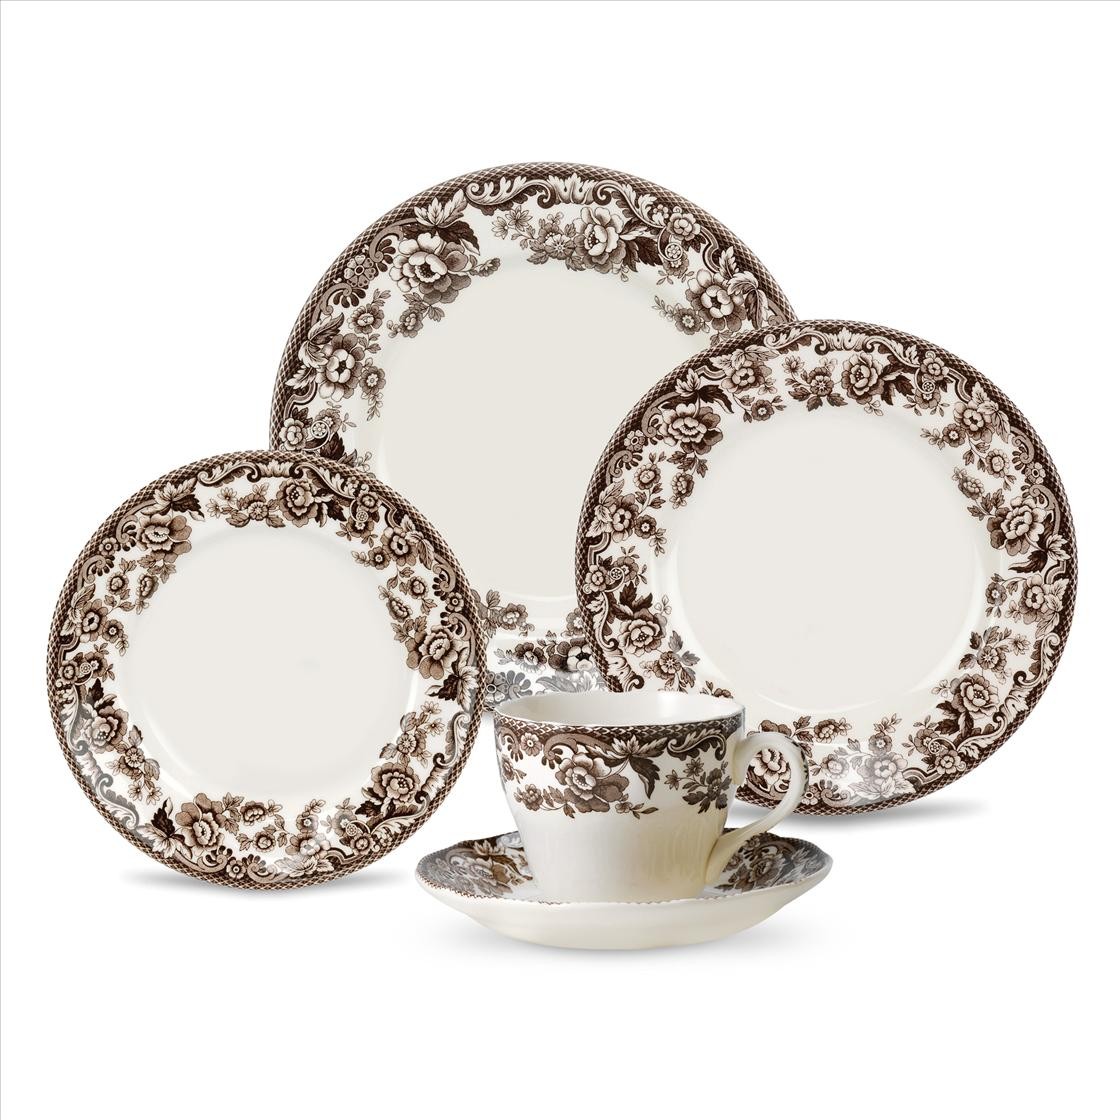 spode-delamere-5-piece-place-setting-4035411.jpg